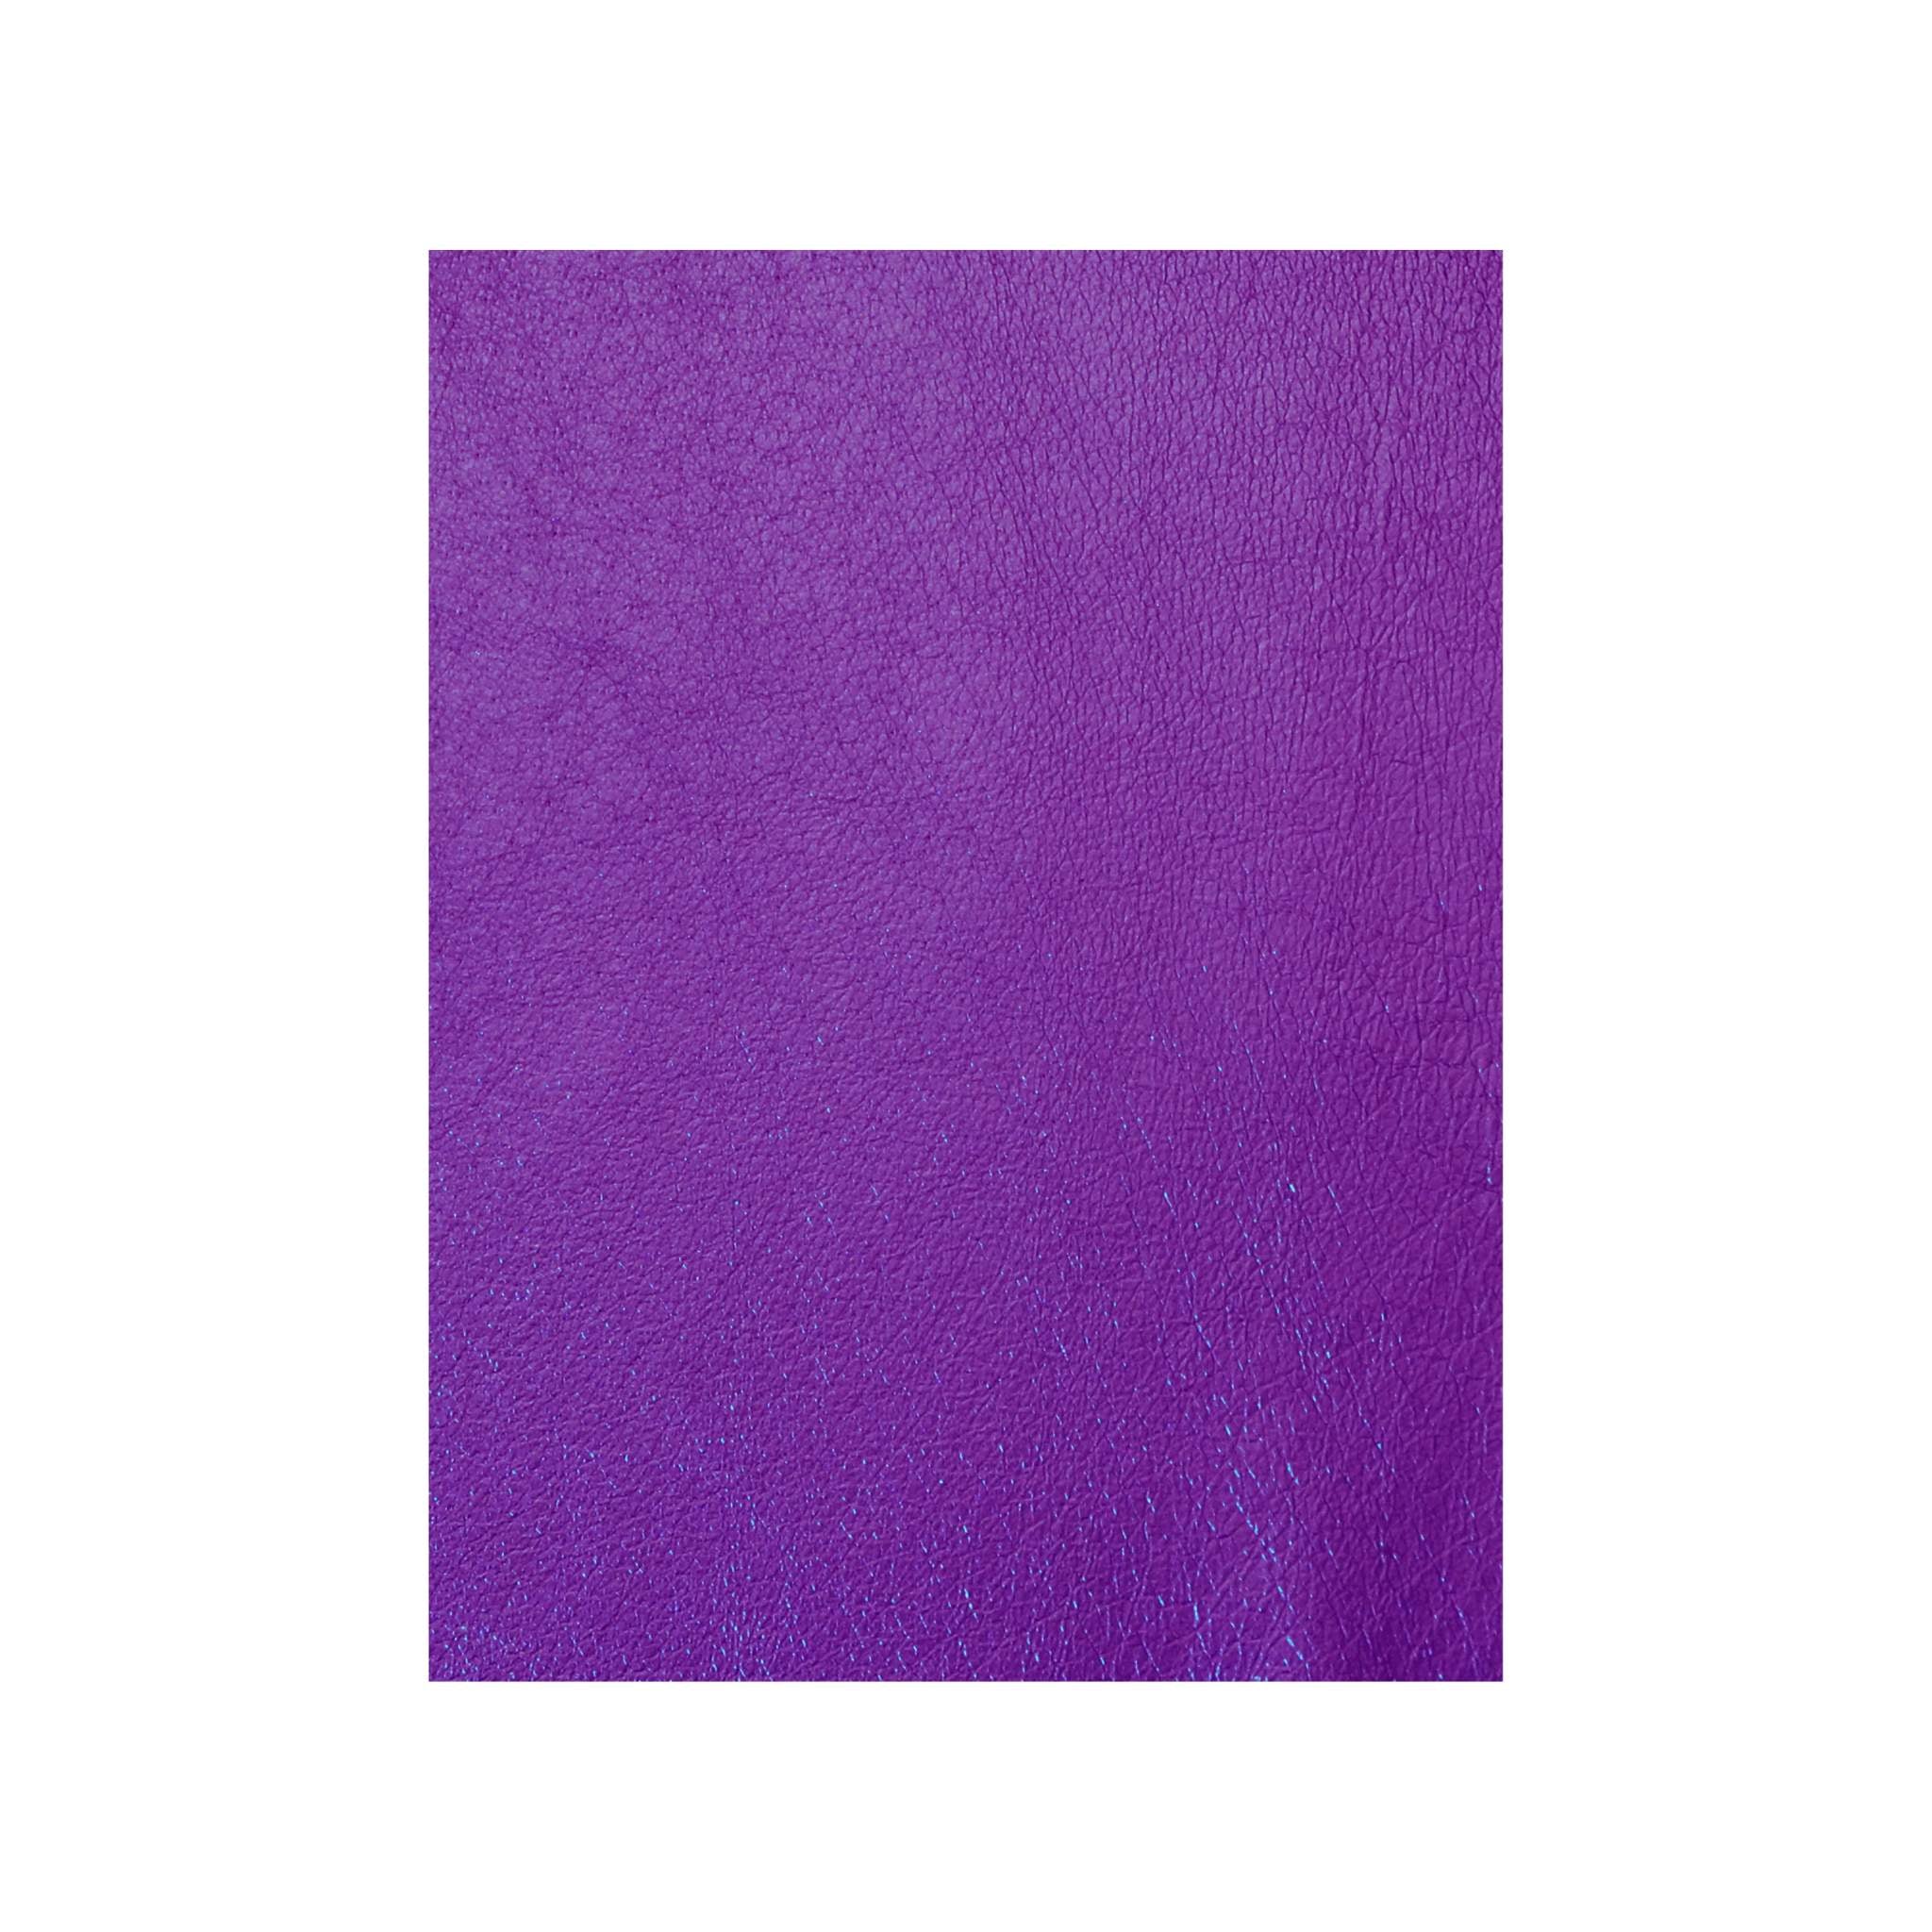 Purple Amethyst Metallic Foil Leather for machine sewing garments, cushions, applique, and more